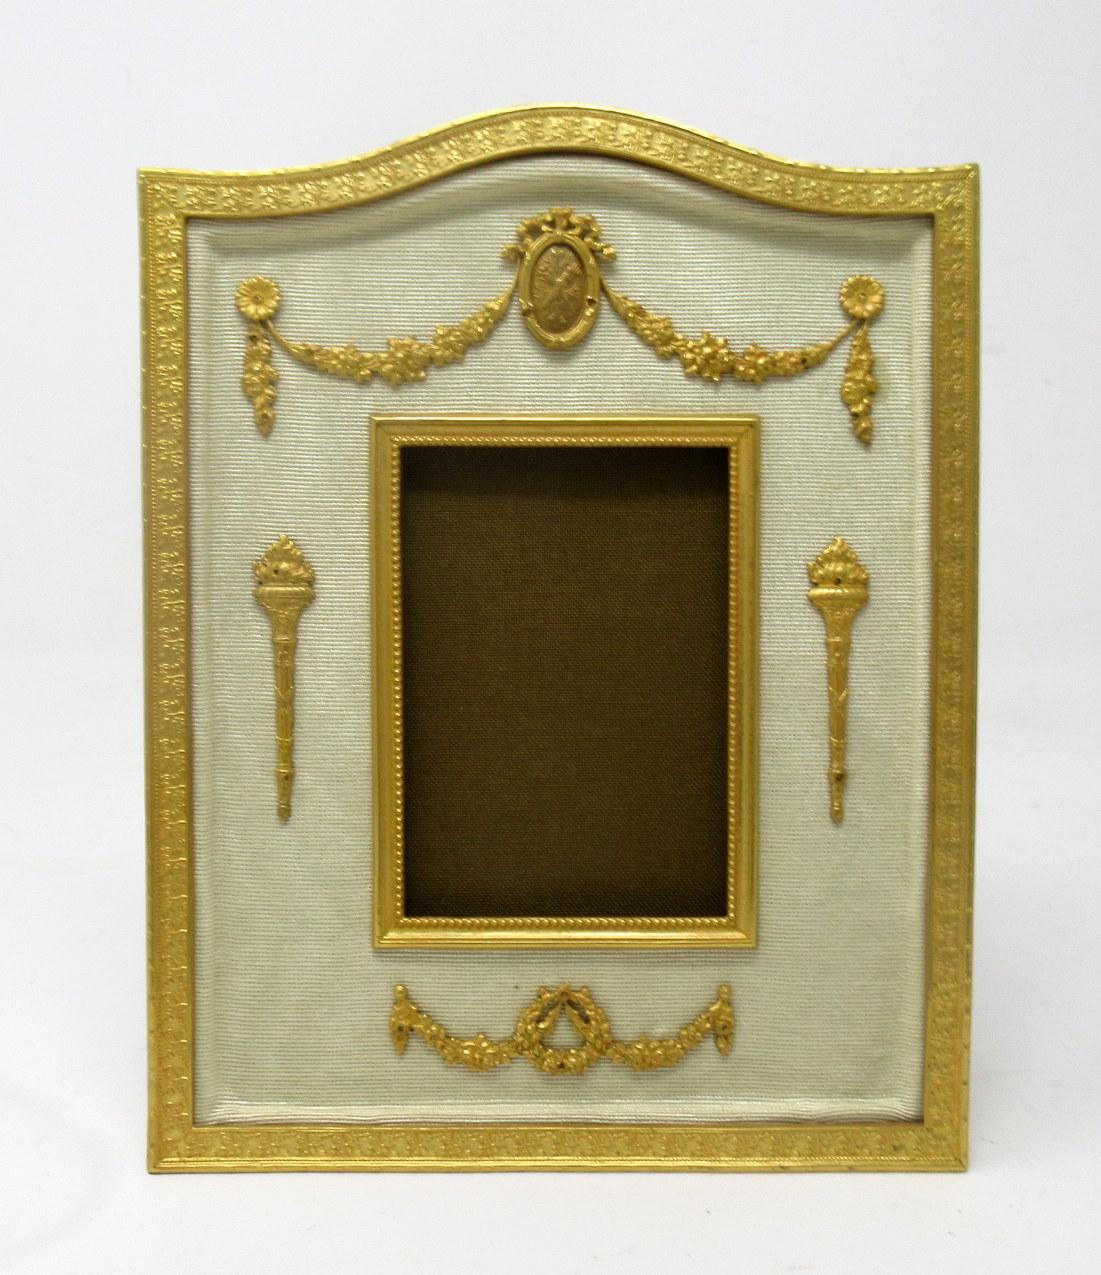 A stunning French heavy gauge Ormolu standing or wall hanging Photo Frame of medium proportions and outstanding quality, mid to late Nineteenth century. 

The arched top ormolu embossed frame enclosing a plain portrait shape photo framed inset